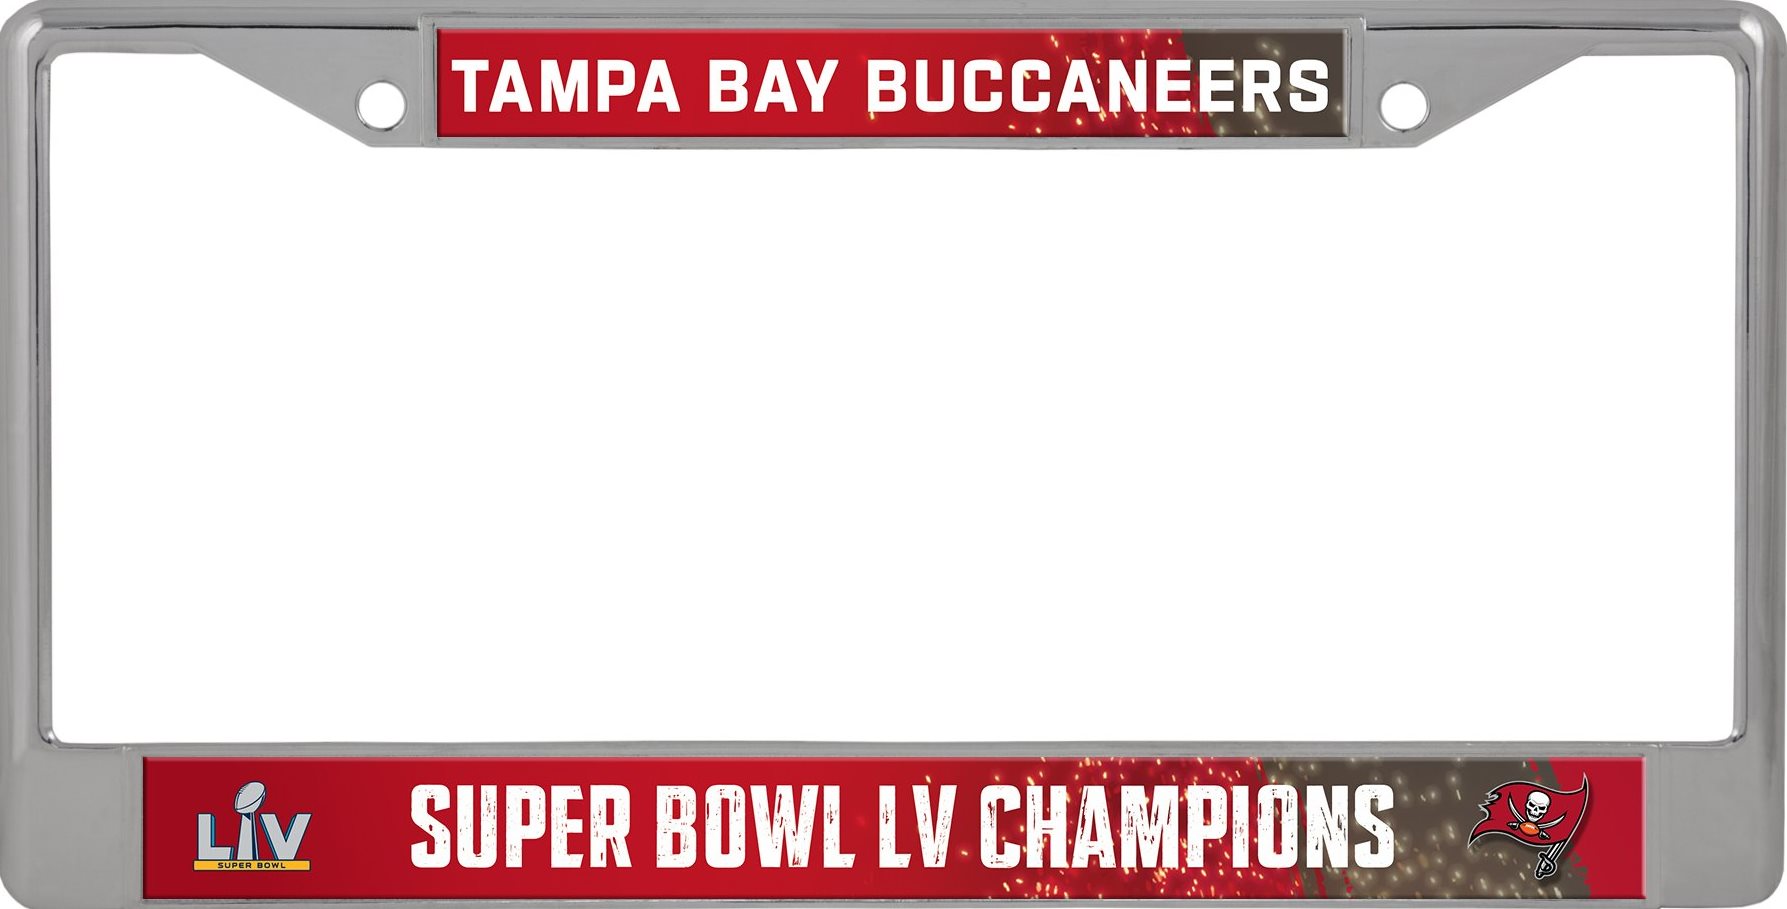 Tampa Bay Buccaneers Super Bowl LV Champs Chrome LICENSE PLATE Frame